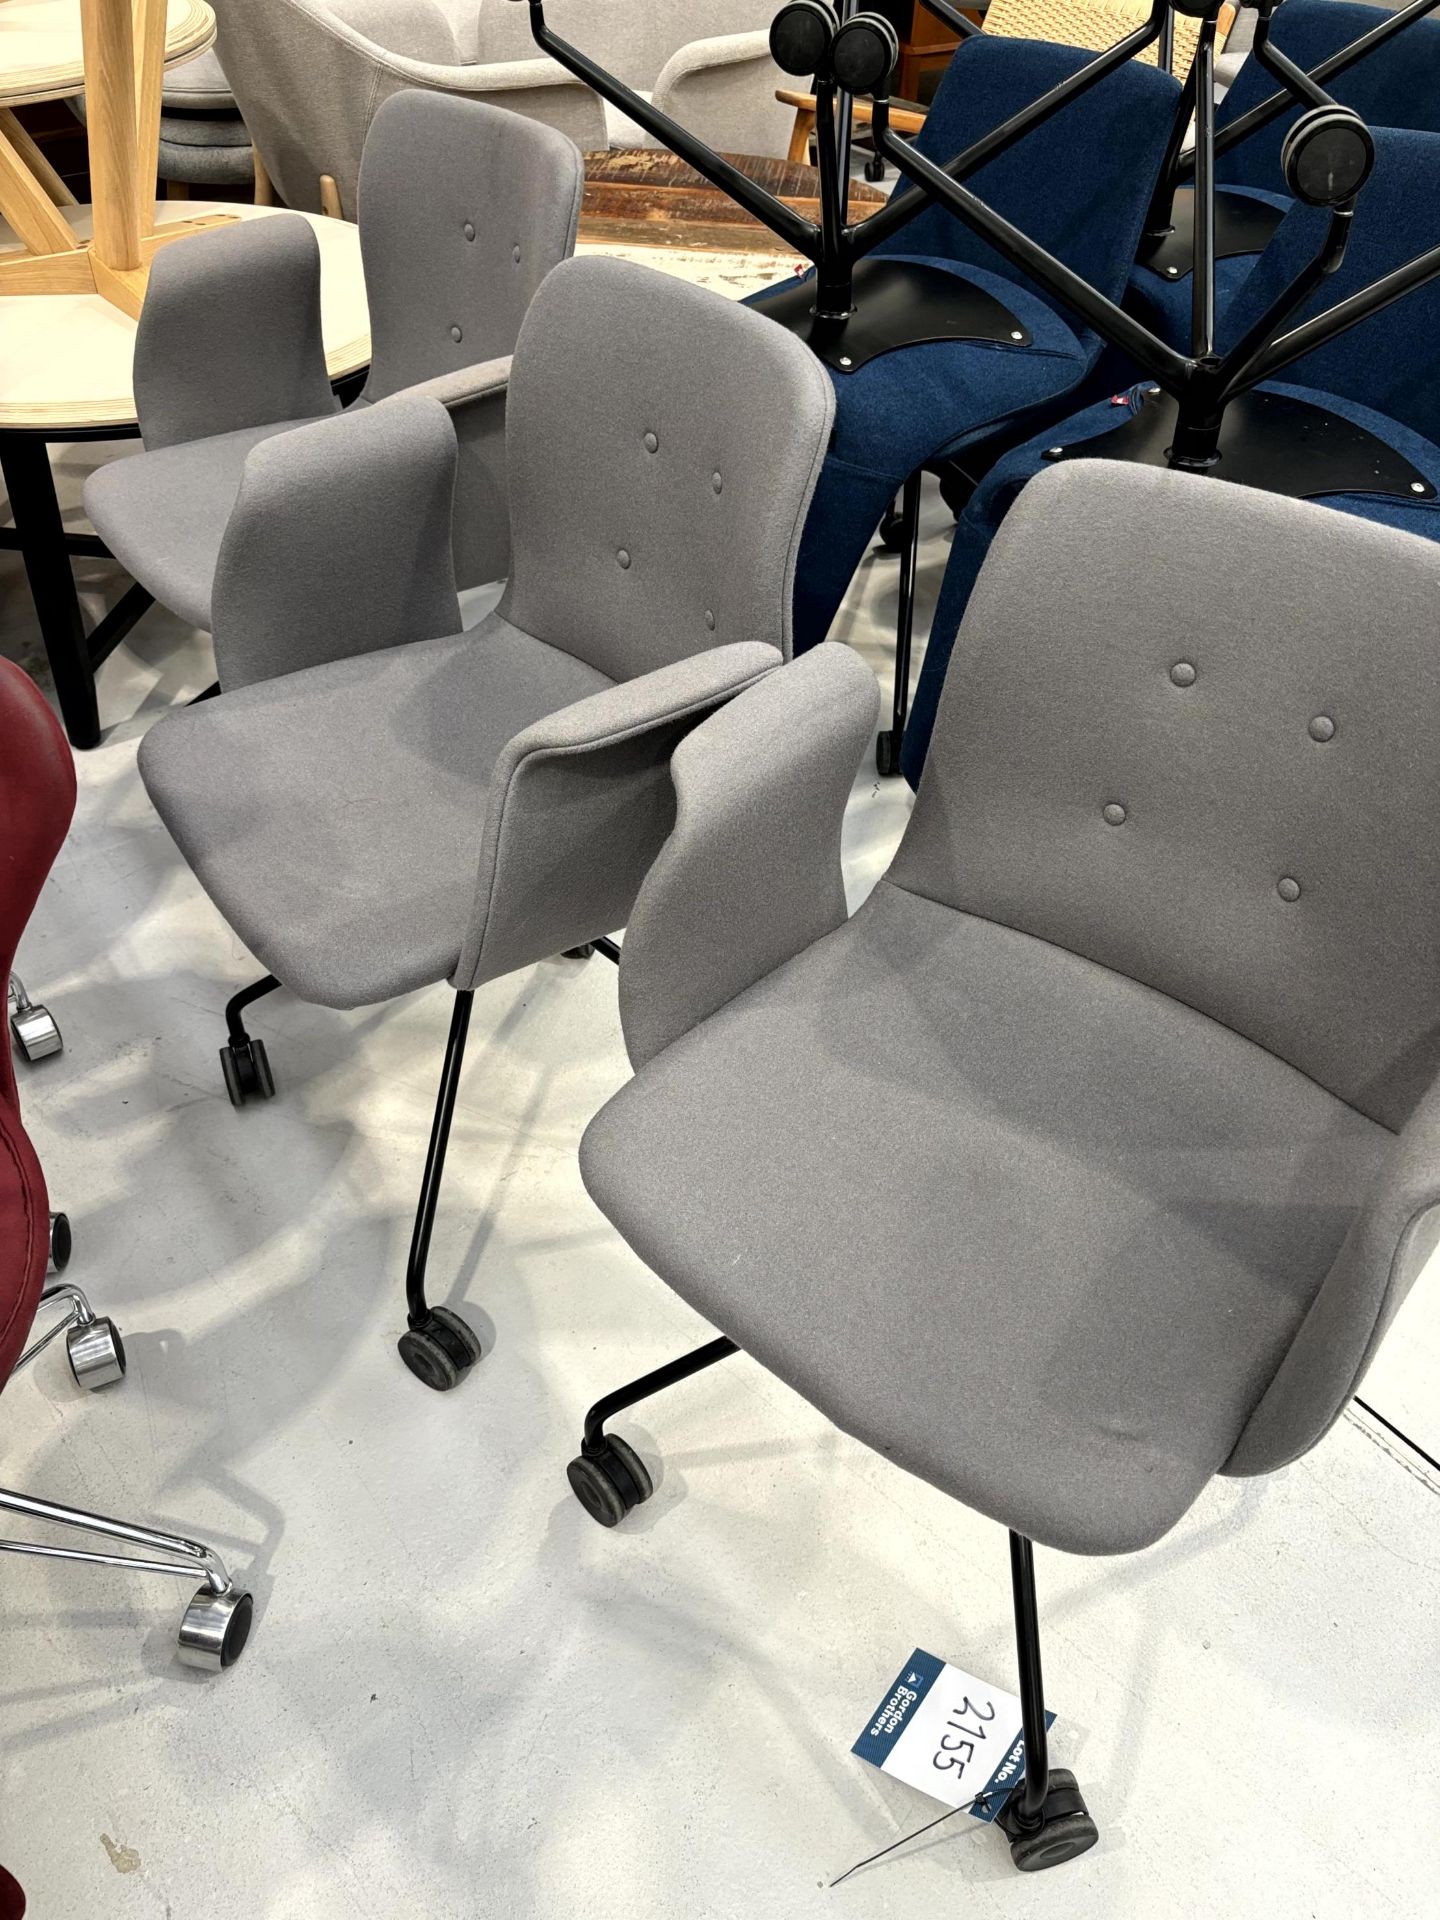 3x (no.) office chairs, cloth upholstered